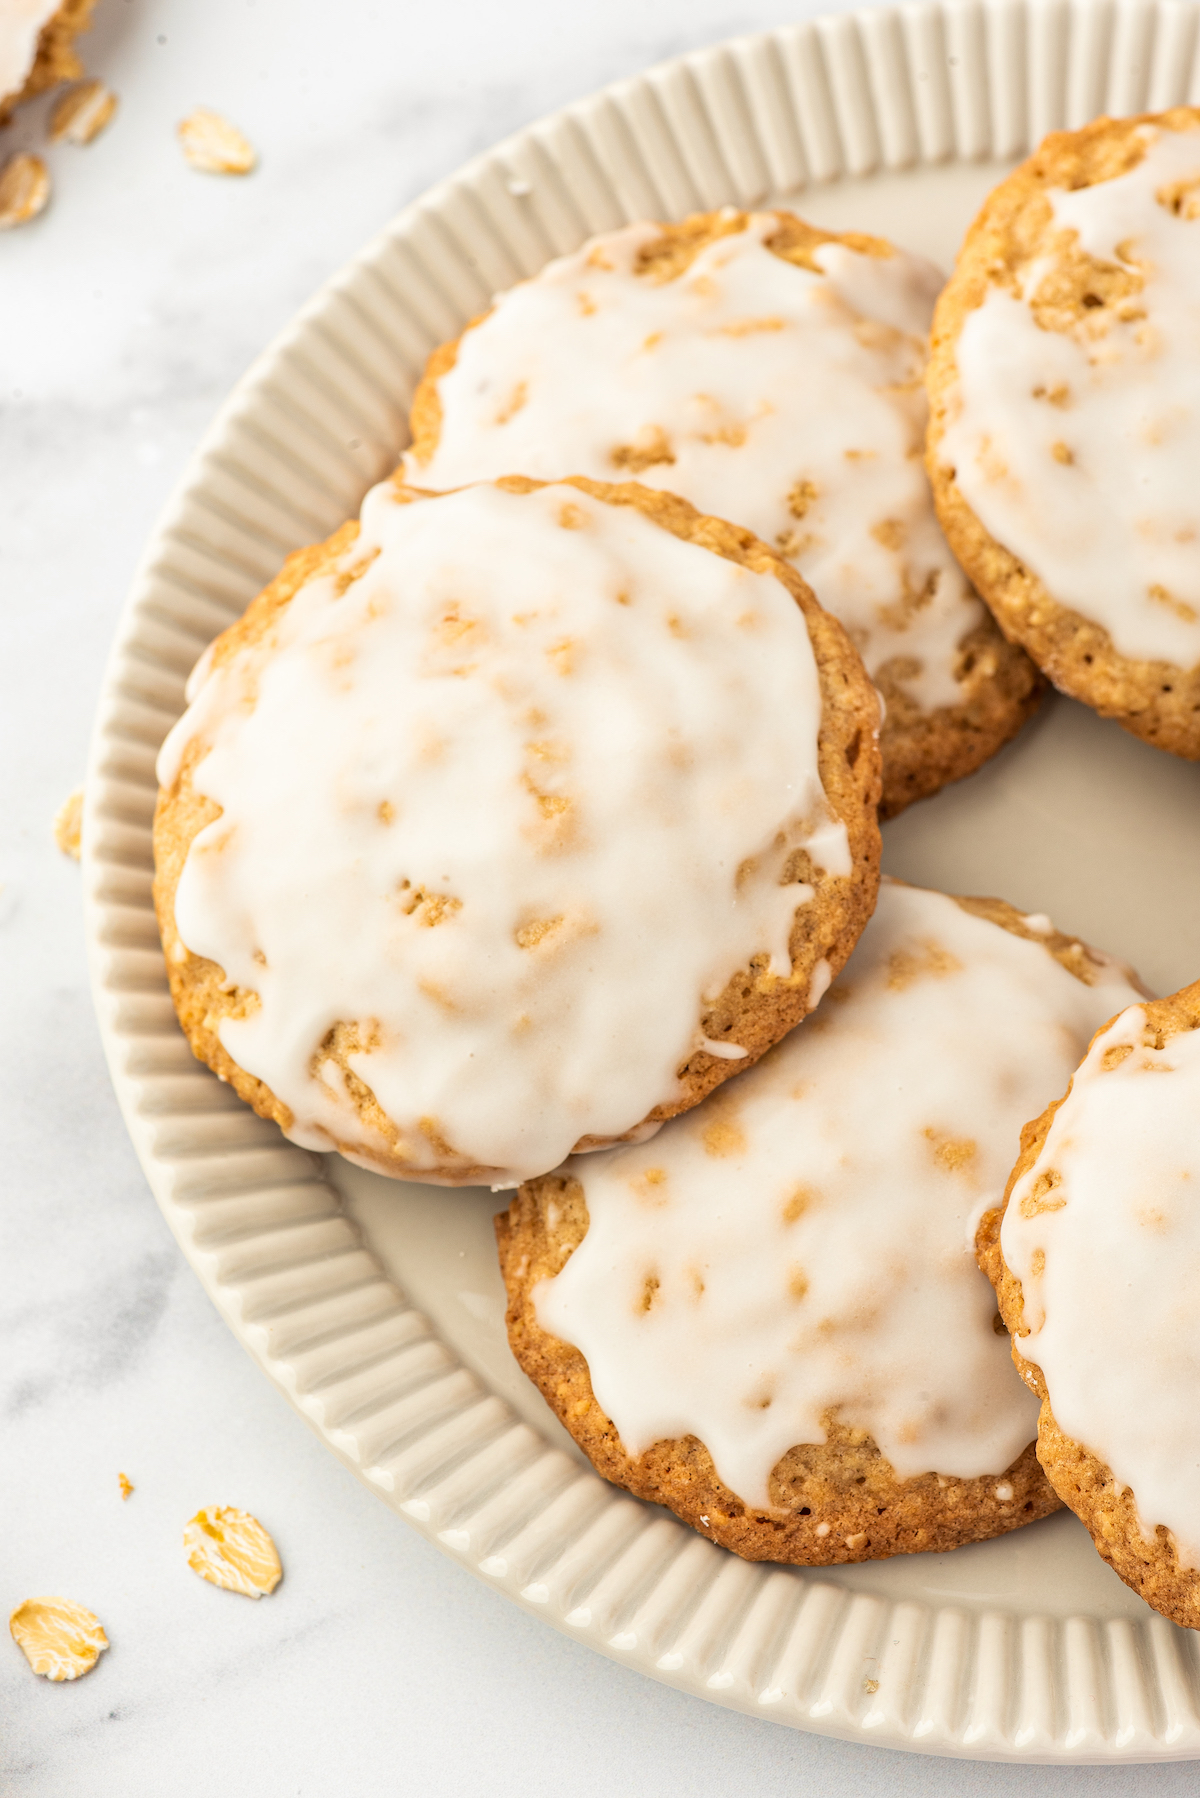 Close-up shot of iced oatmeal cookies arranged in an overlapping circle on a plate.